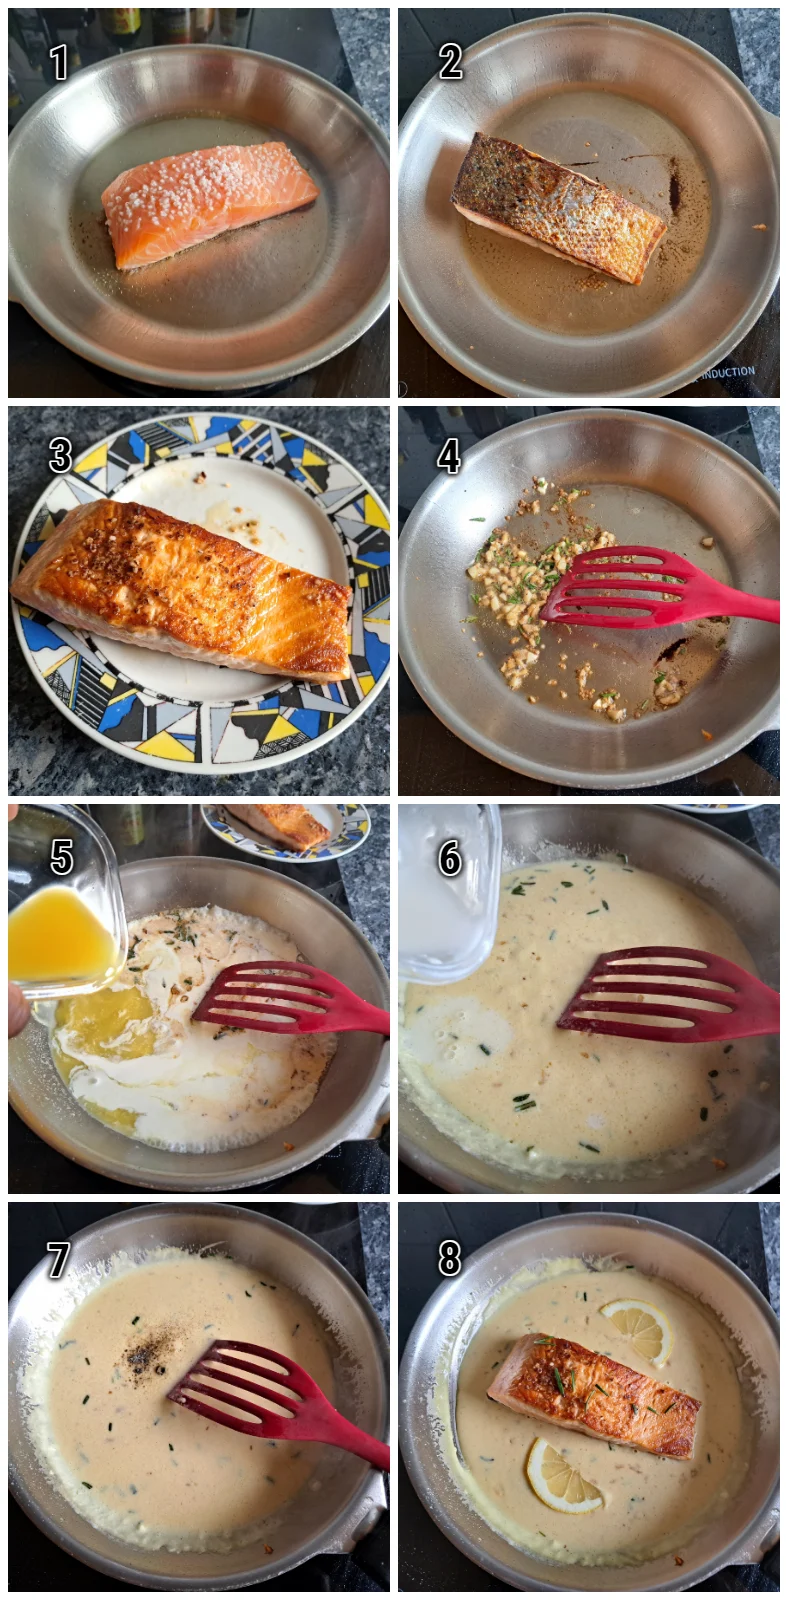 Step-by-step collage illustrating the process of preparing salmon in creamy orange sauce. Images include pan-frying the salmon, crafting the flavorful orange sauce, and seamlessly incorporating the fish into the pan with the delectable sauce, providing a visual guide to the recipe's progression.